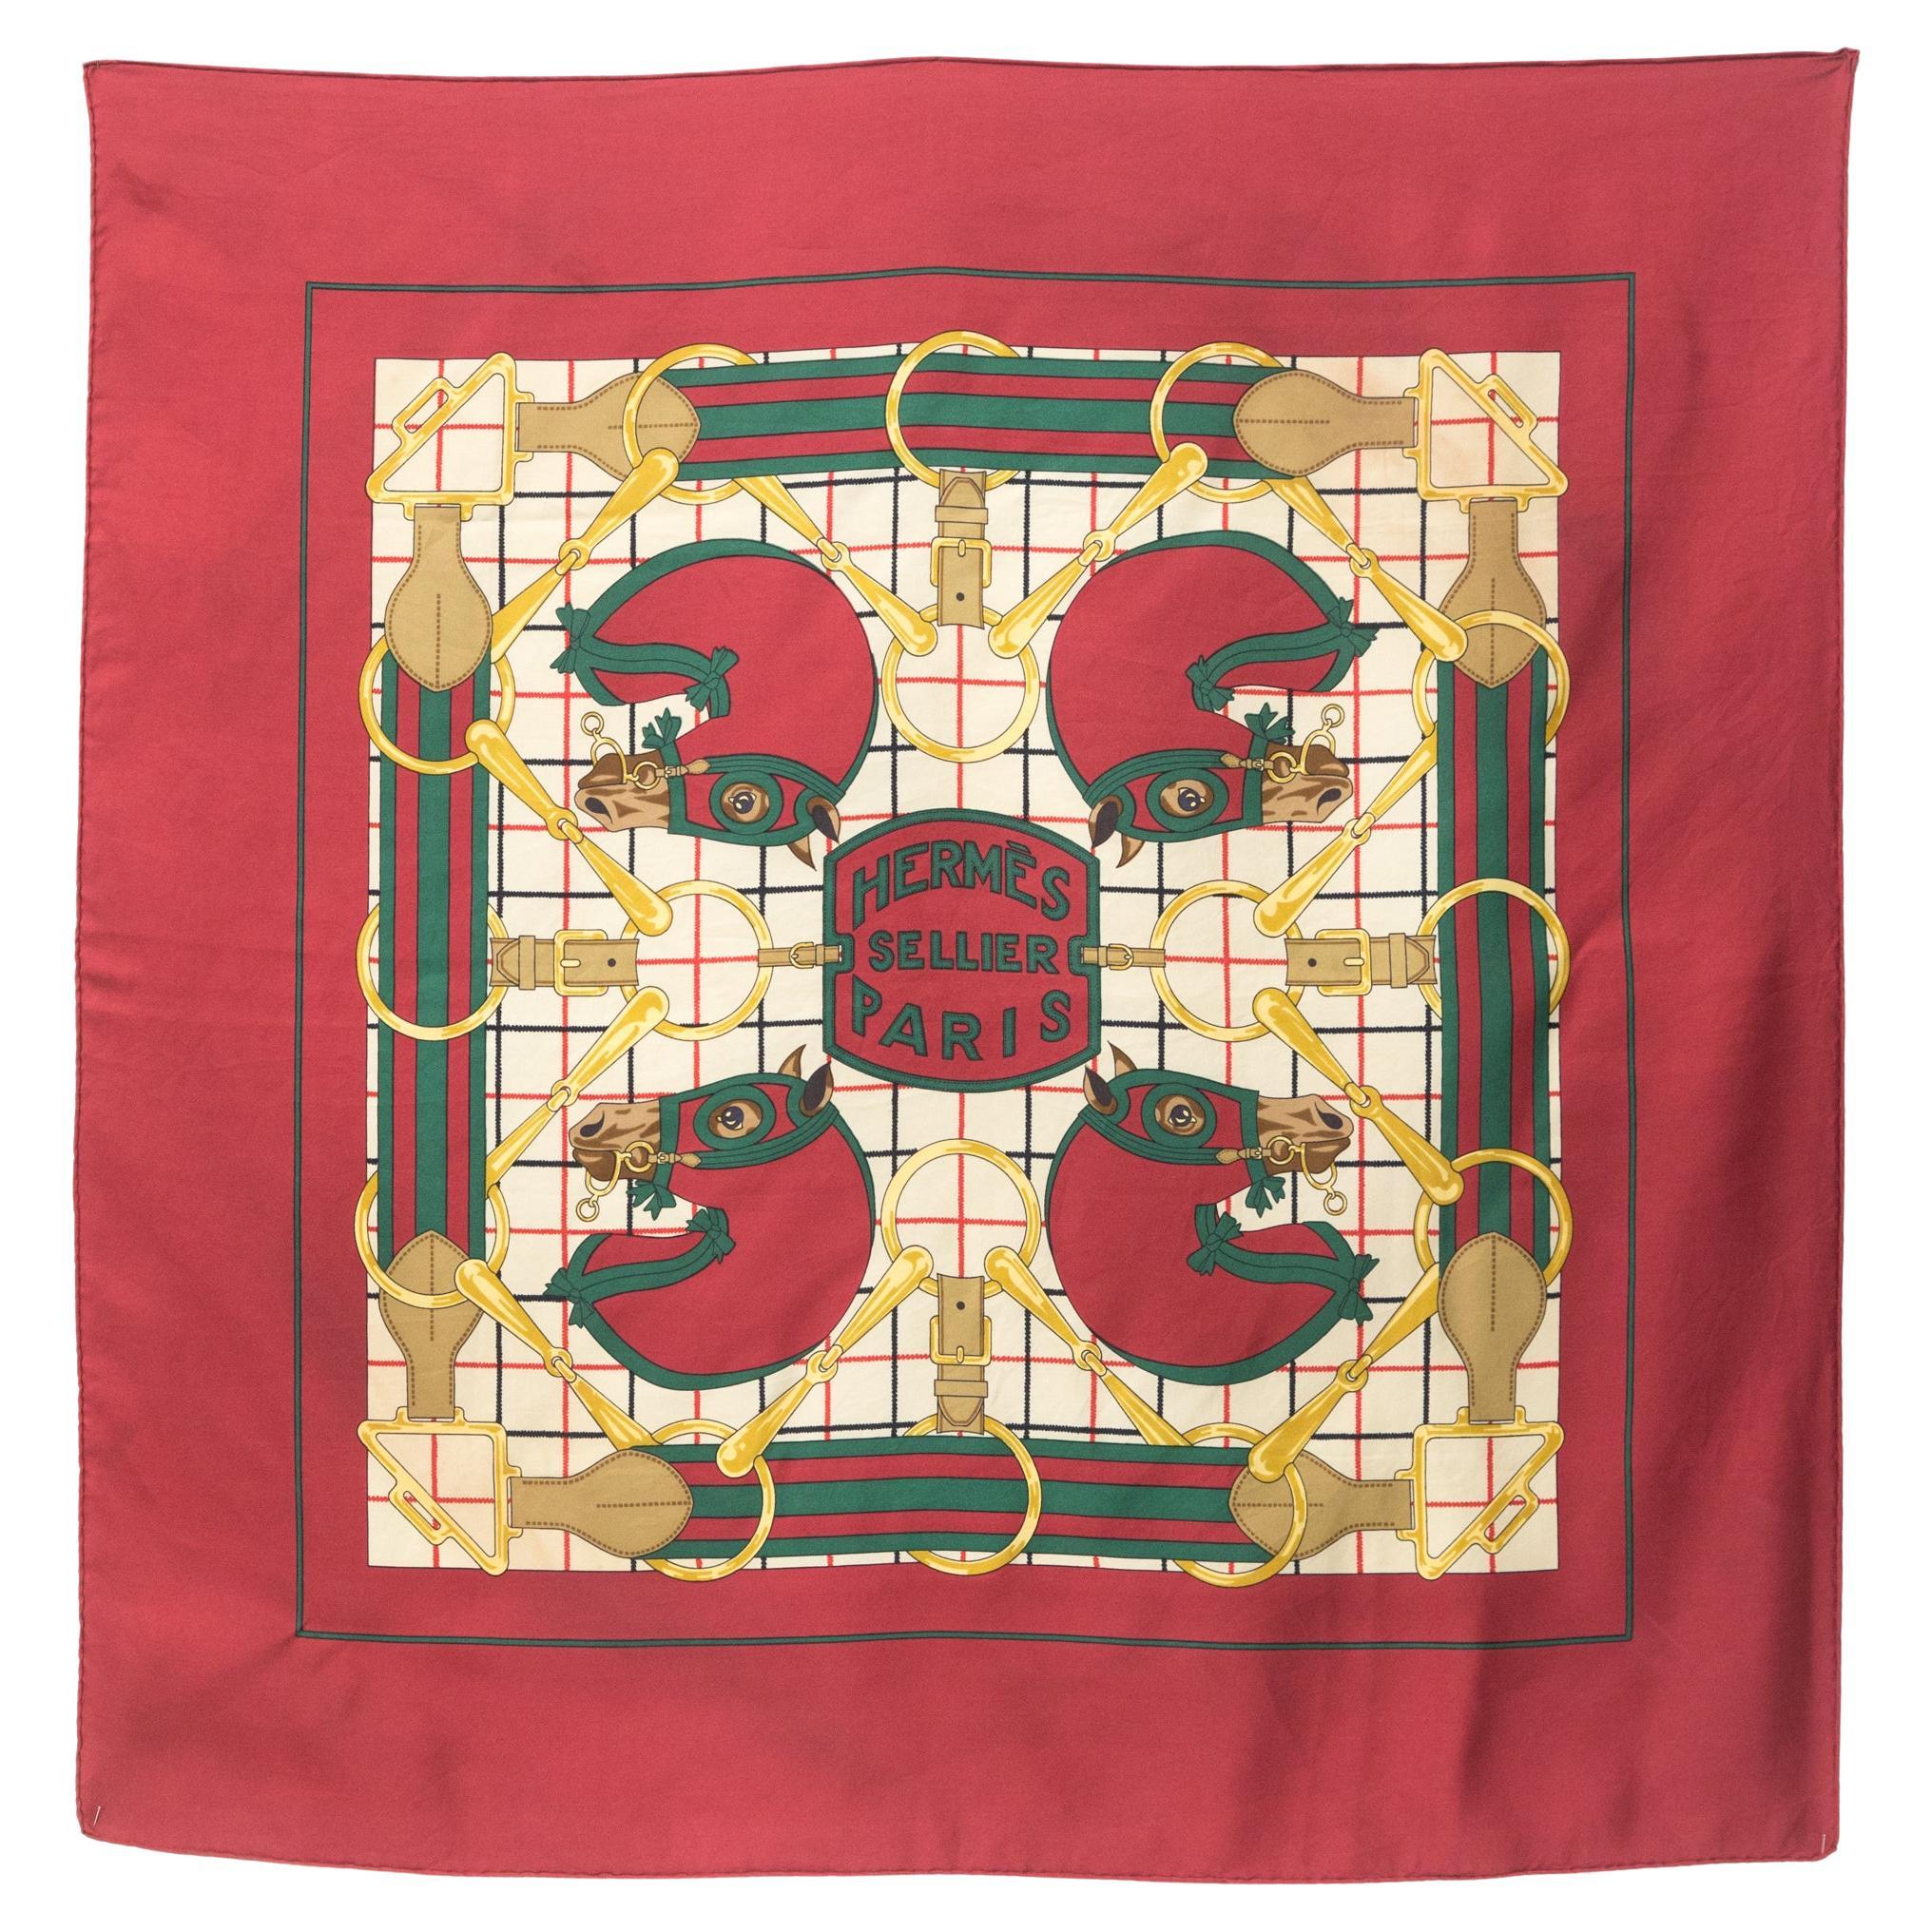 Hermes Sellier or Tatersale by H.d'Origny Silk Scarf